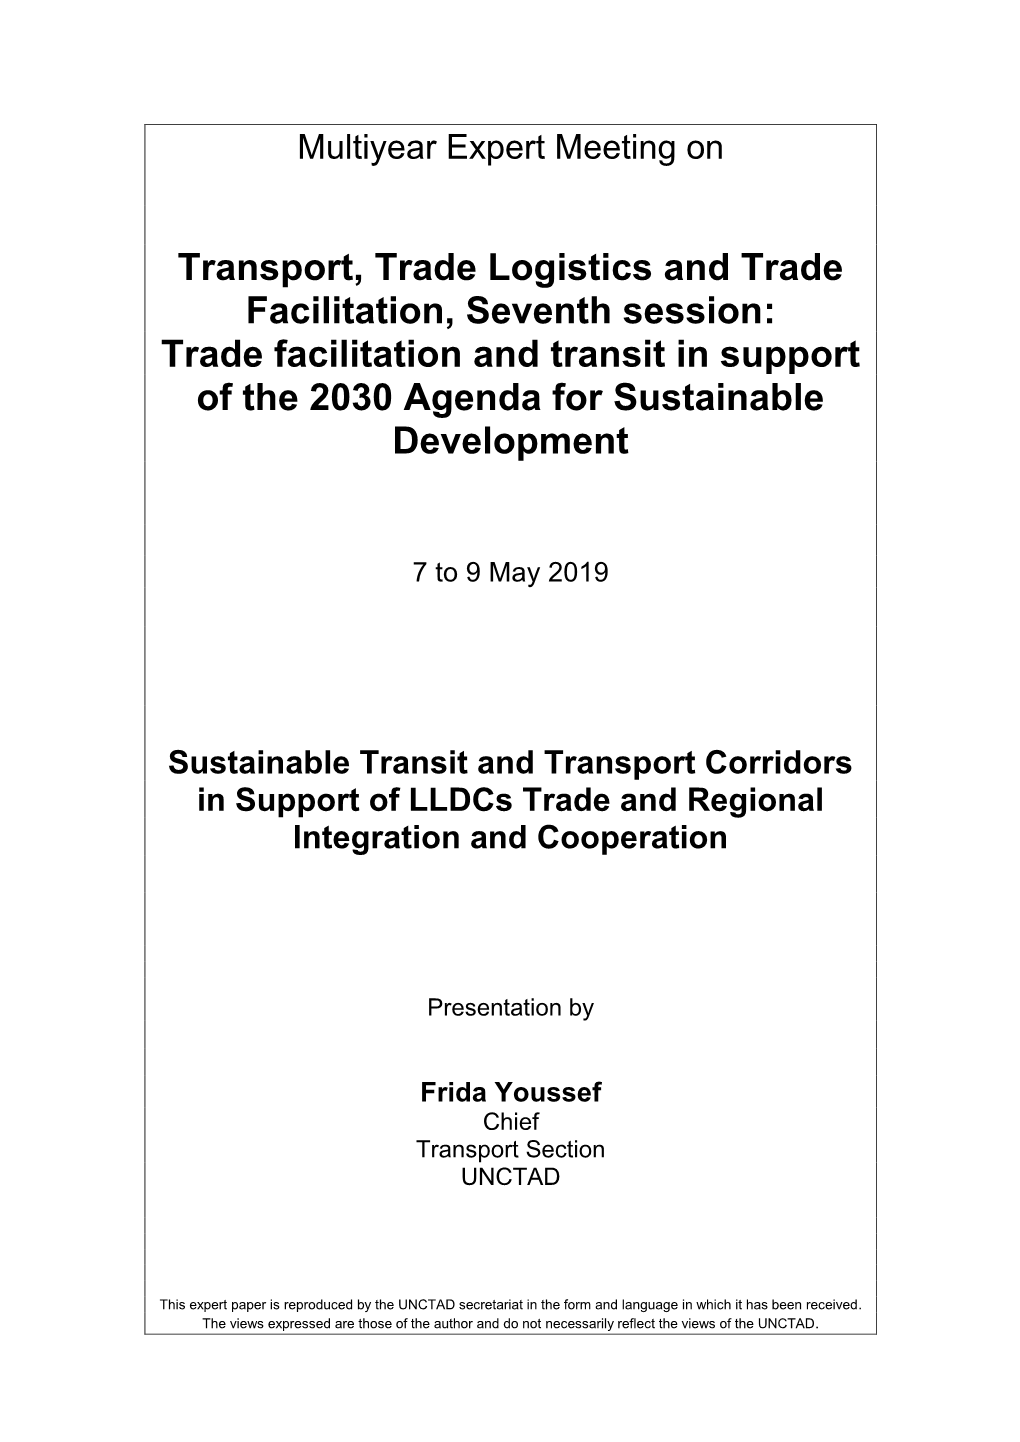 Sustainable Transit and Transport Corridors in Support of Lldcs Trade and Regional Integration and Cooperation